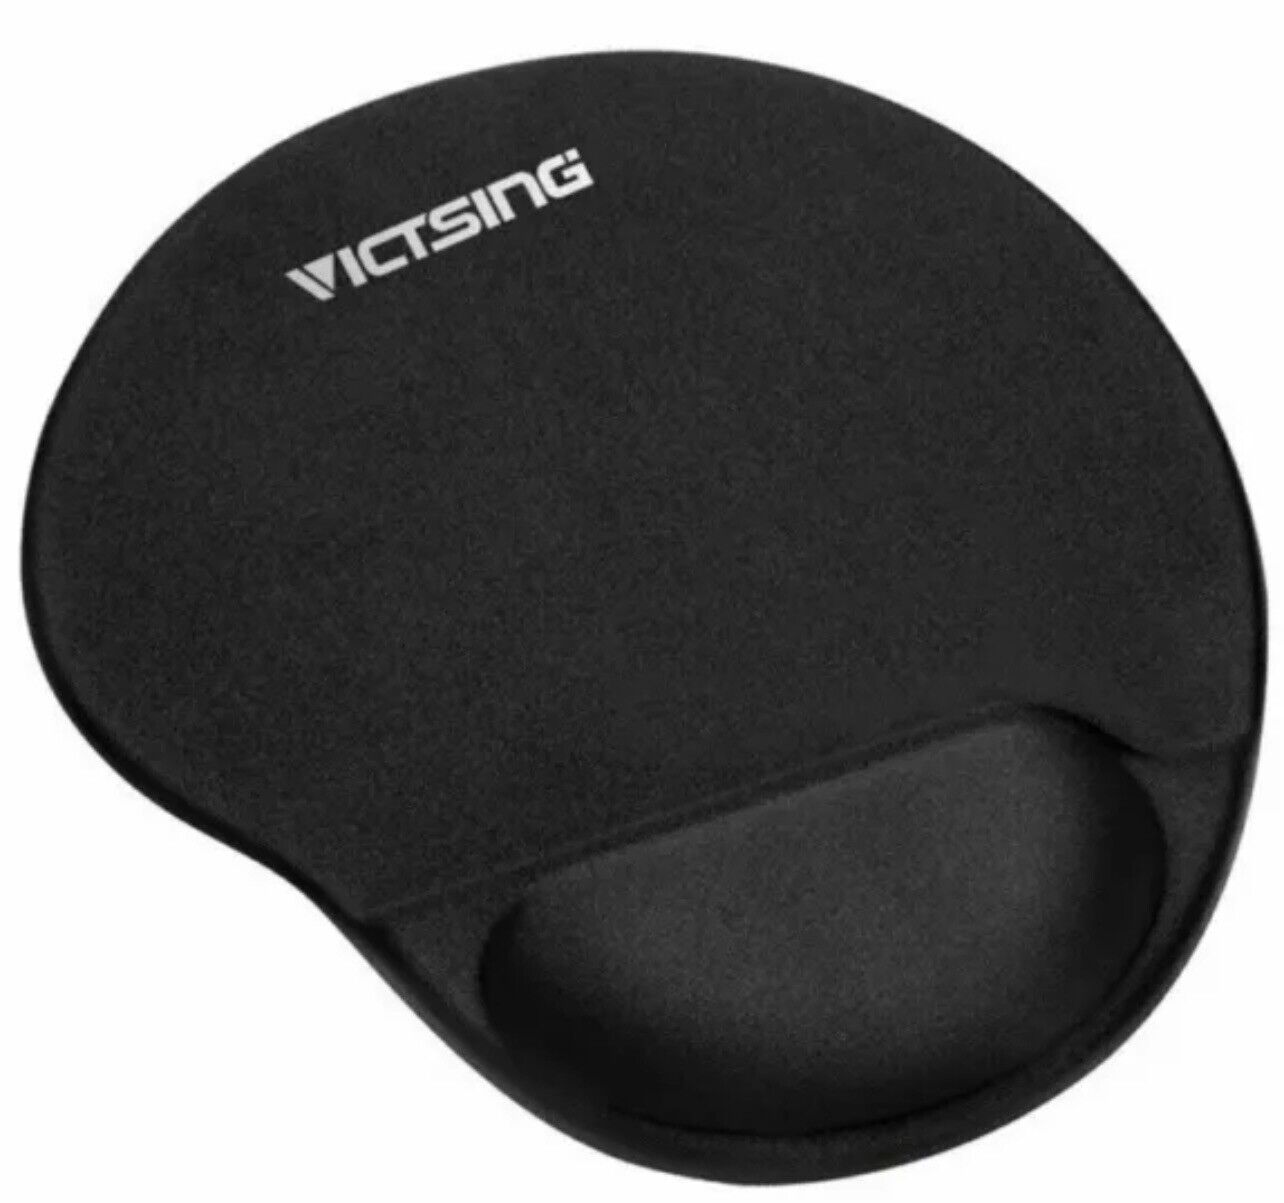 Victsing High Quality Gel Mouse Pad Wrist Suppor Non-Slip PU Base Mouse Mat USA